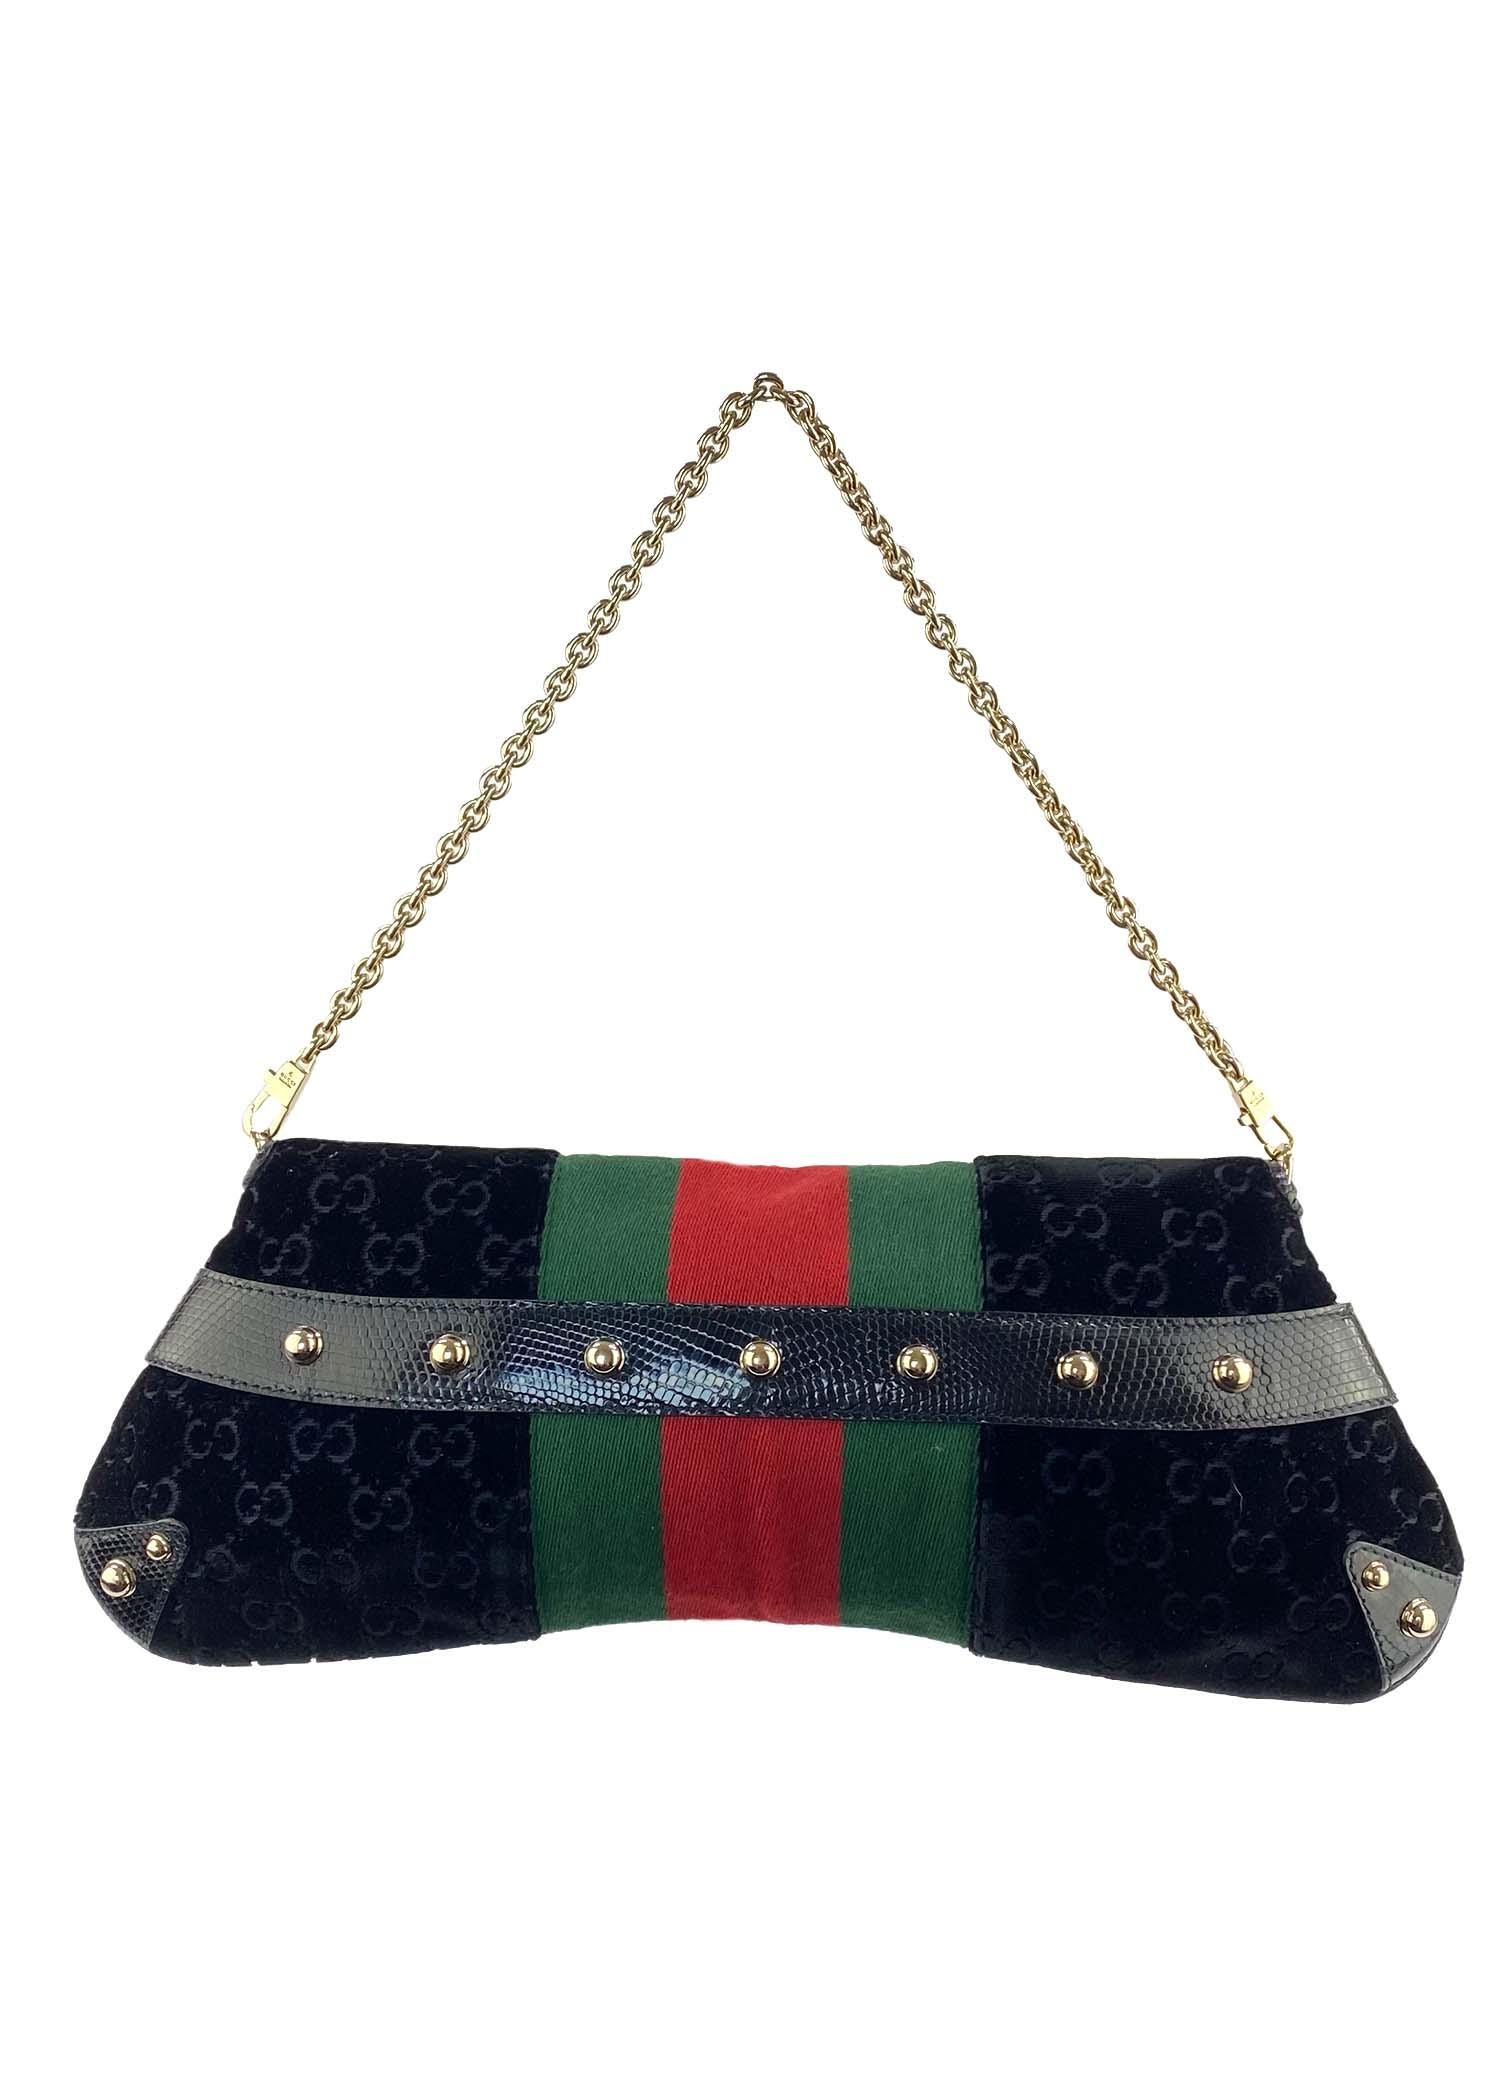 TheRealList presents: Designed by Tom Ford during his tenure at the house of Gucci, this bag represents Tom's interpretation of many of Gucci's classic elements ('GG' print, horse bits, etc.). This large evening convertible bag is constructed of